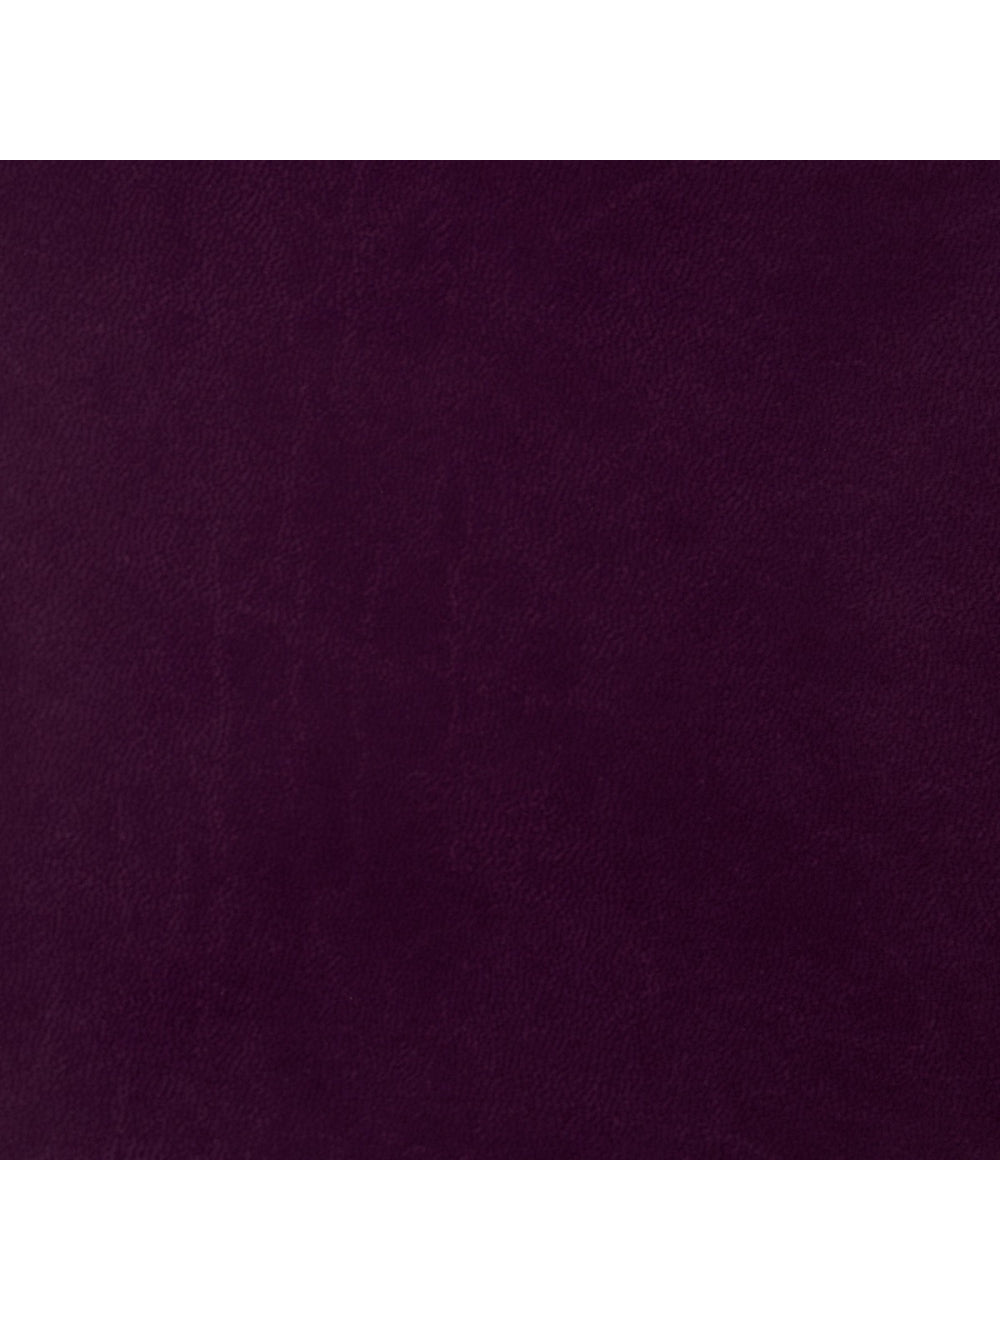 Rome Eggplant Material Swatch (D460-9682)